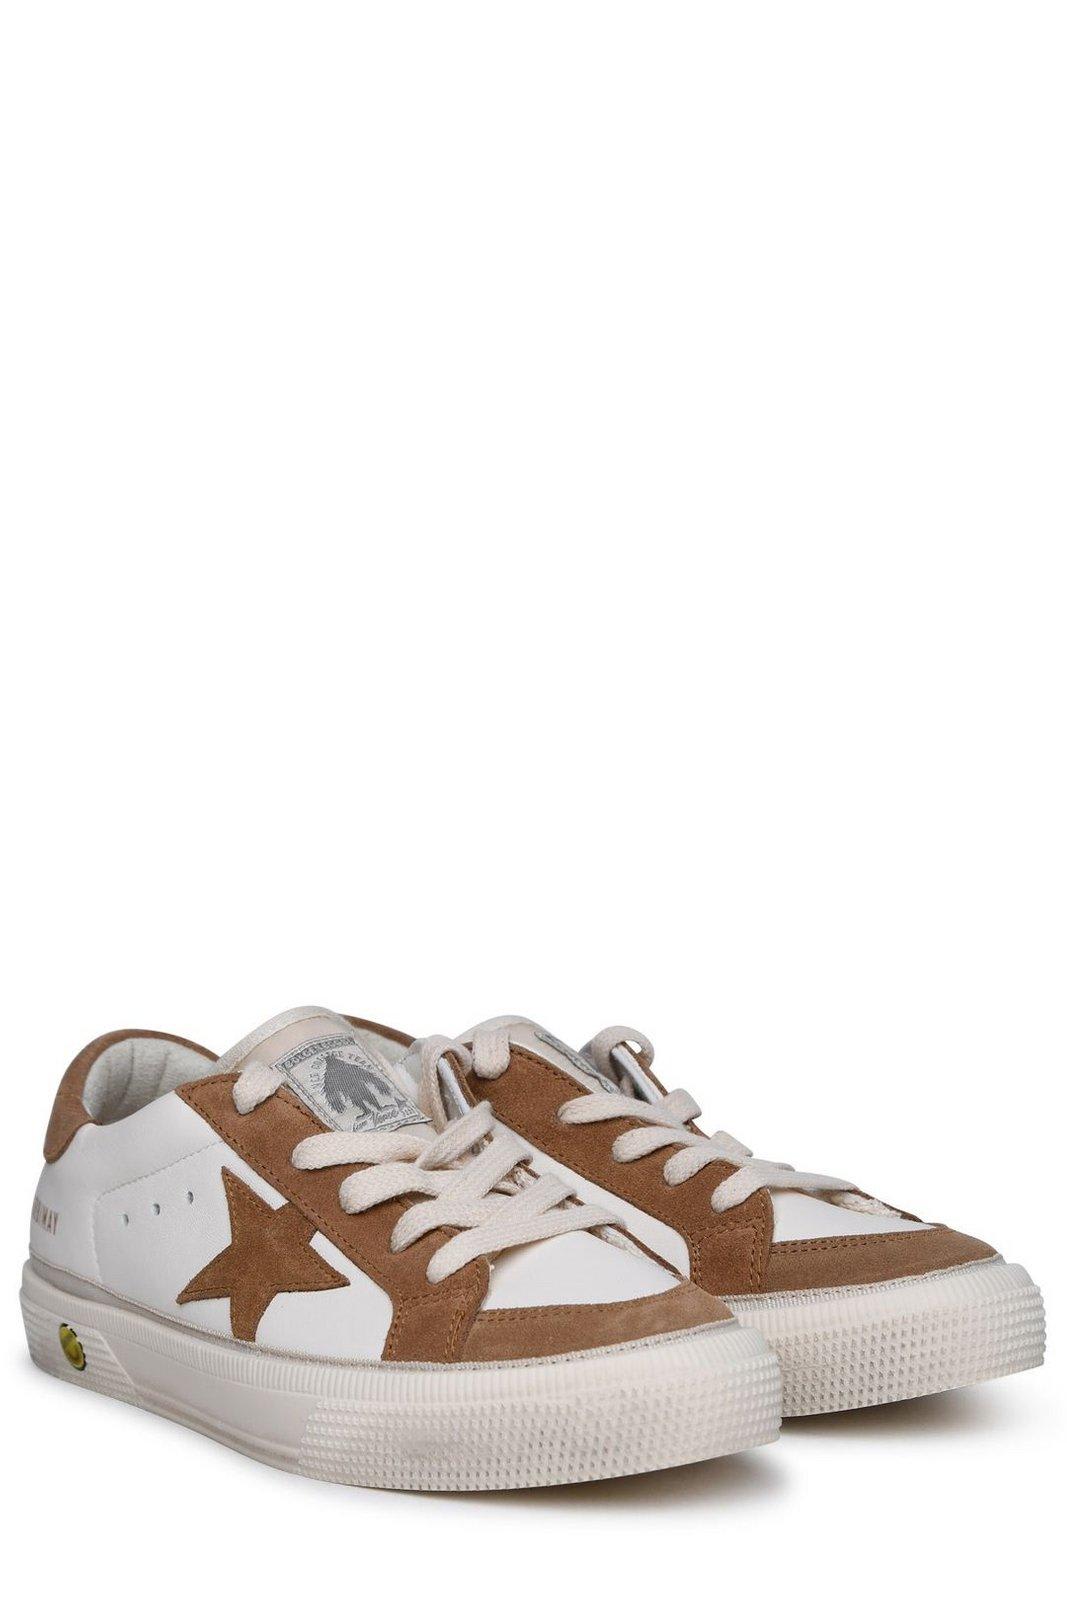 Shop Golden Goose Superstar Lace-up Sneakers In White/light Brown